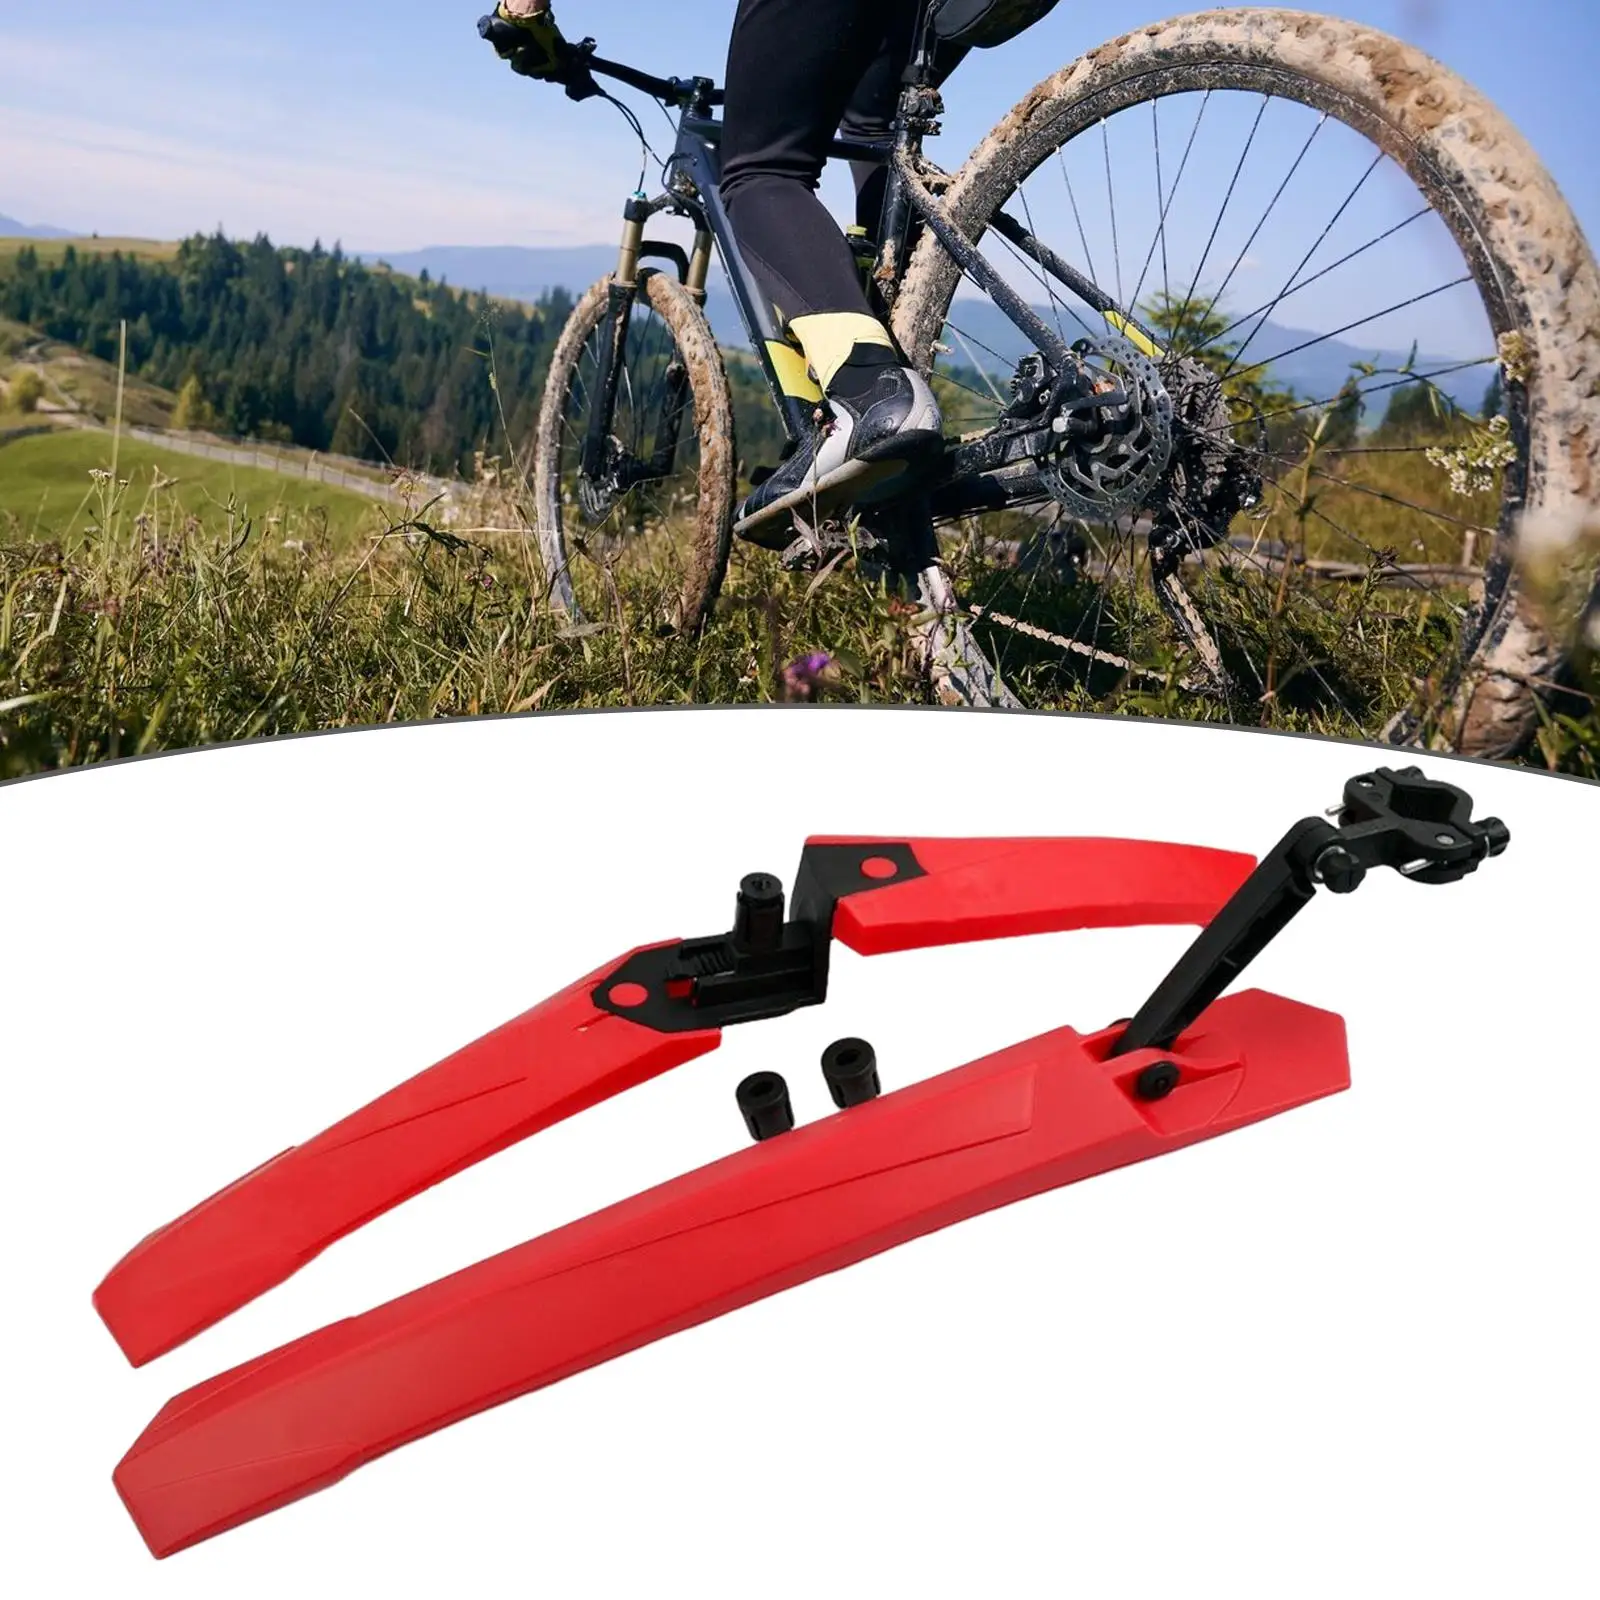 Bike Mudguard Front Rear Set Wheel Protection Easy to Install Portable Bicycle Mud Guard for Riding Cycling Outdoor Sports Accs